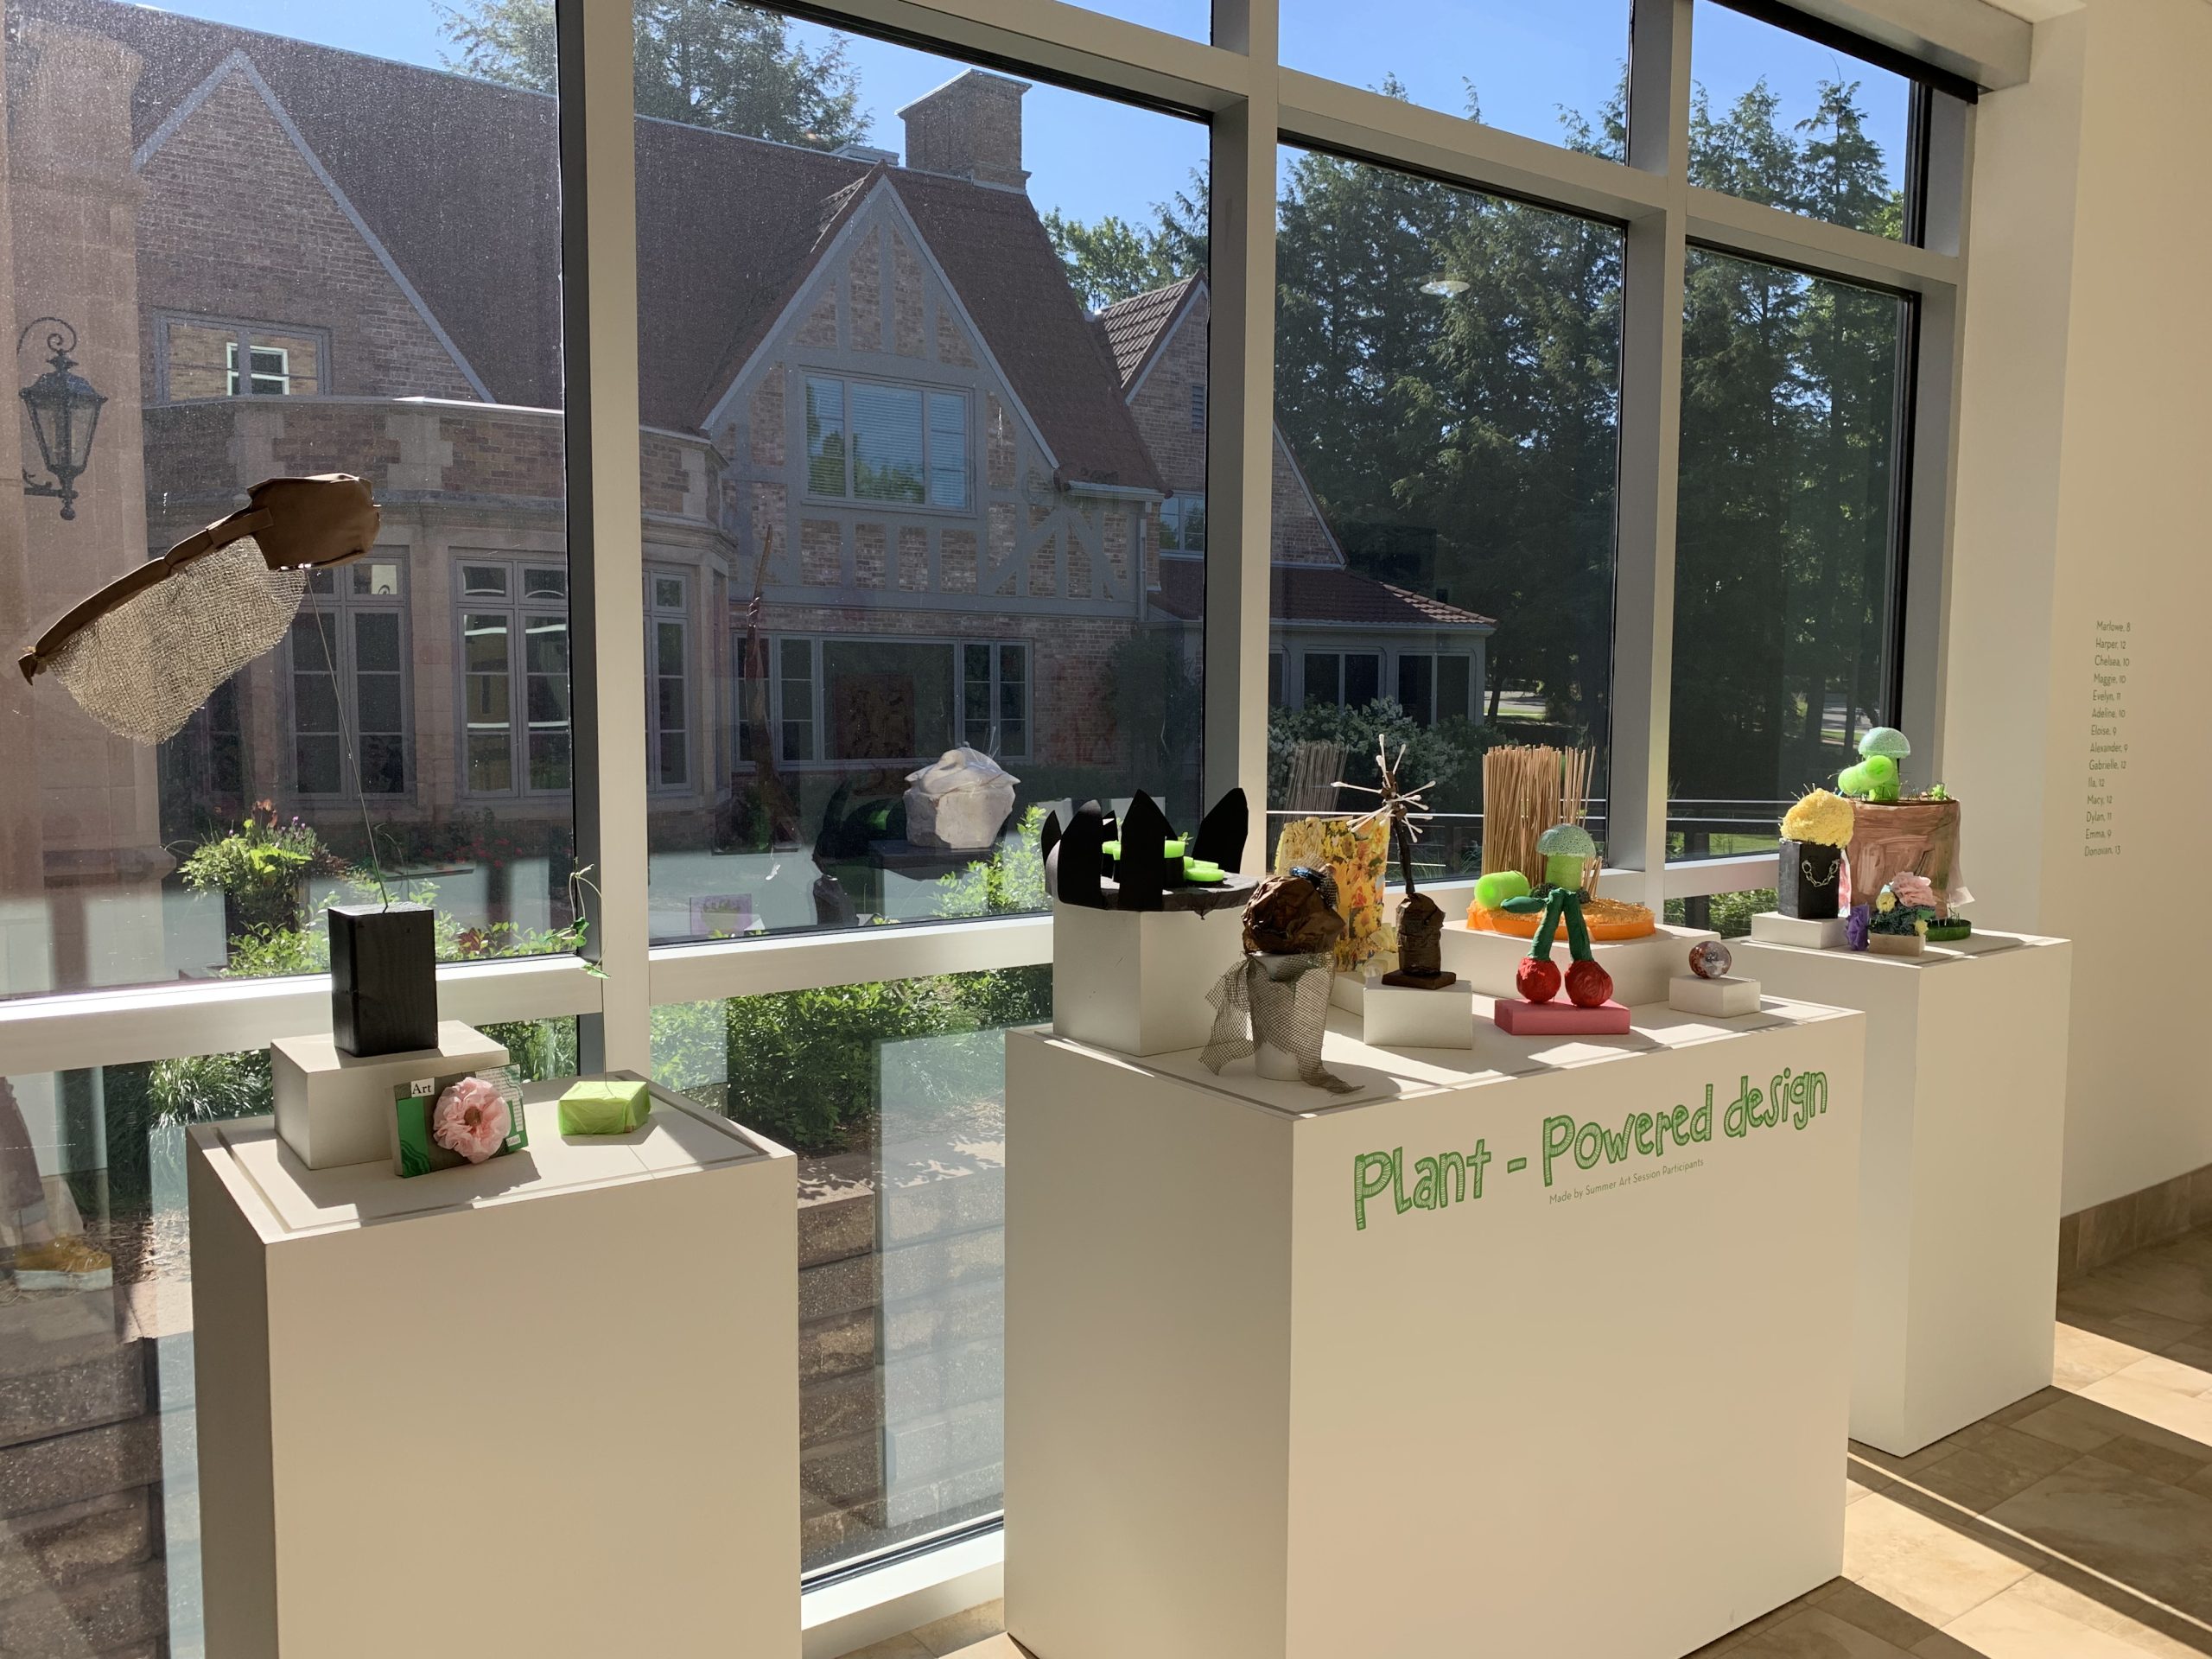 This is a second image of the Art Session projects display, featuring the three-dimensional sculptures created by older students. The projects are displayed in small groups on top of a three white pedestals, shaped like rectangles, positioned in front of a sunny window; outside the window is the pathway to the Museum's main entrance doors where you can see part of the Museum building and garden beds.